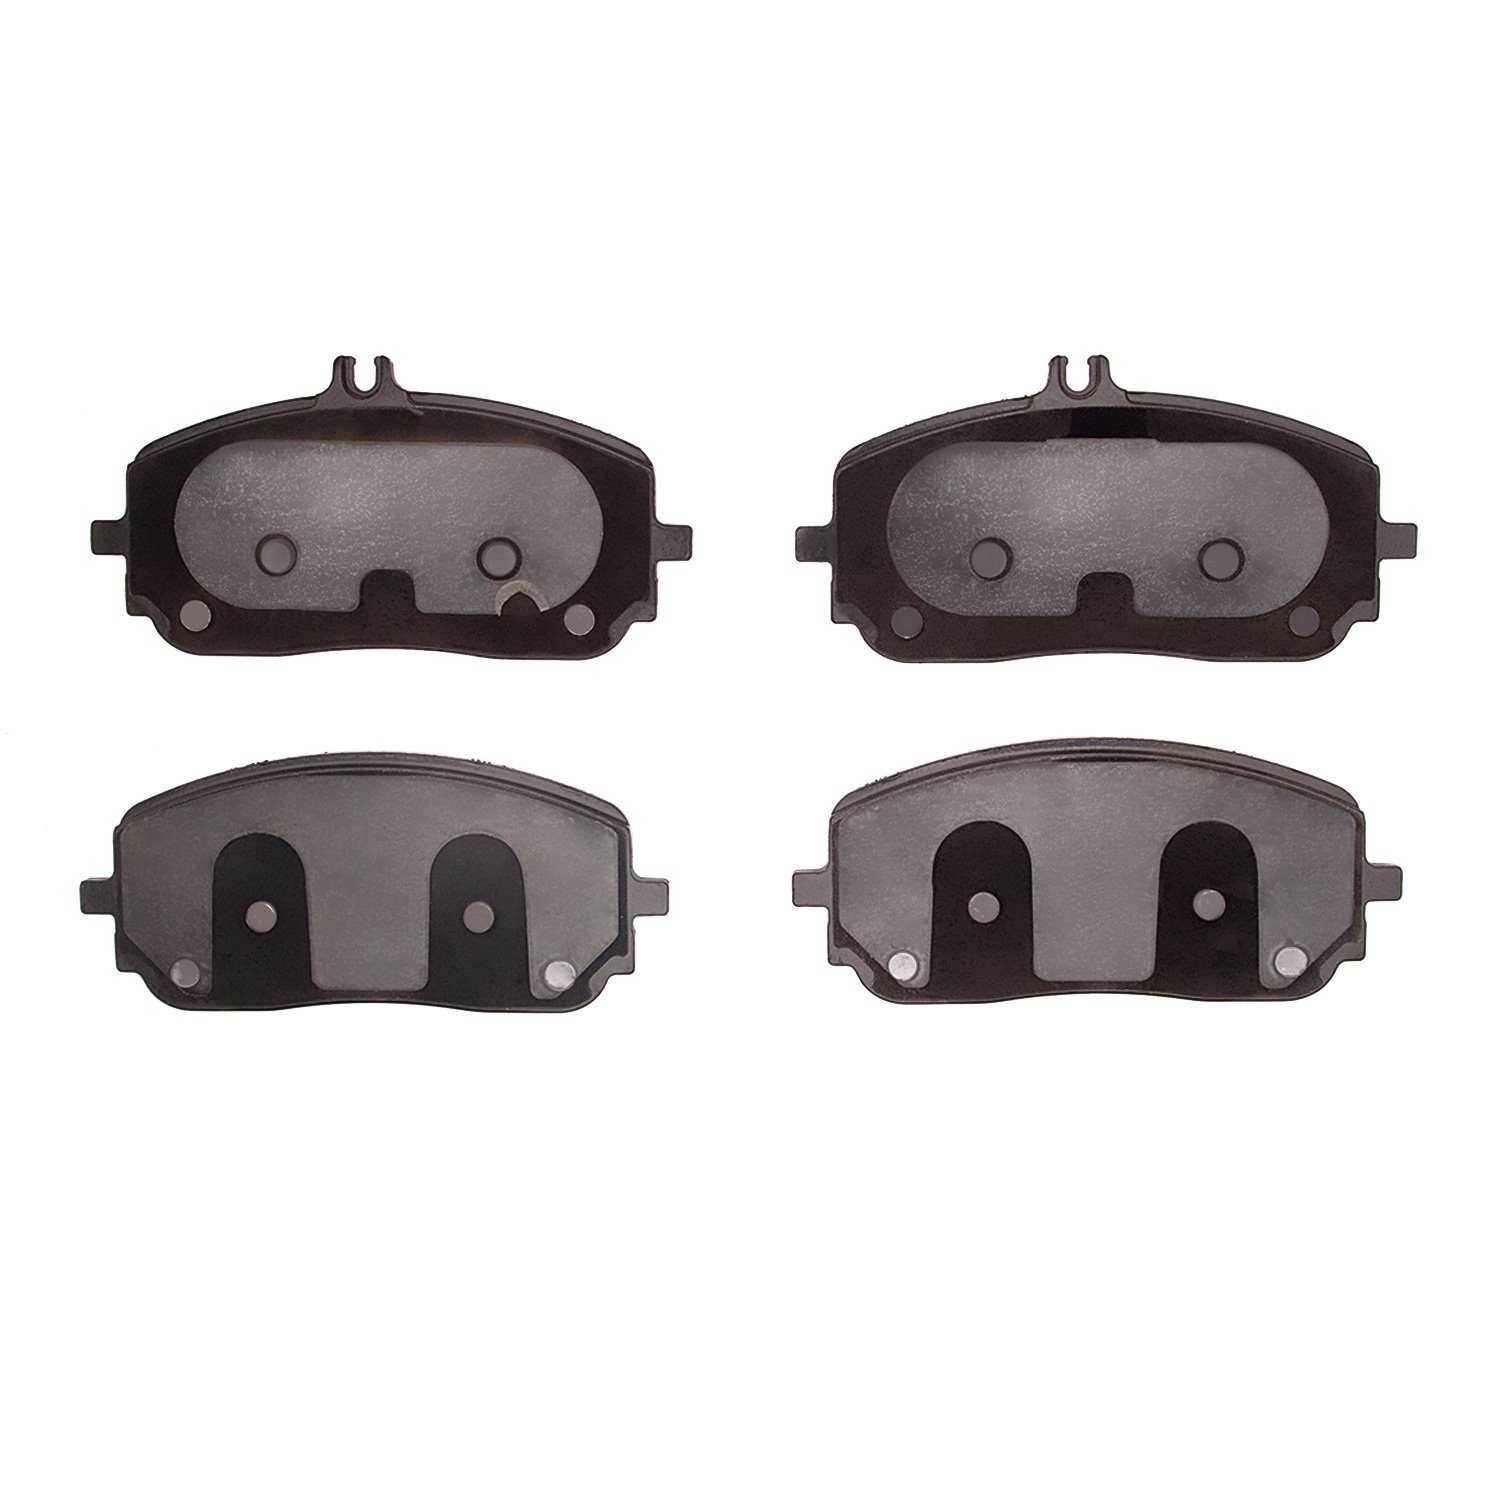 1552-2209-00 5000 Advanced Ceramic Brake Pads, Fits Select Mercedes-Benz, Position: Front